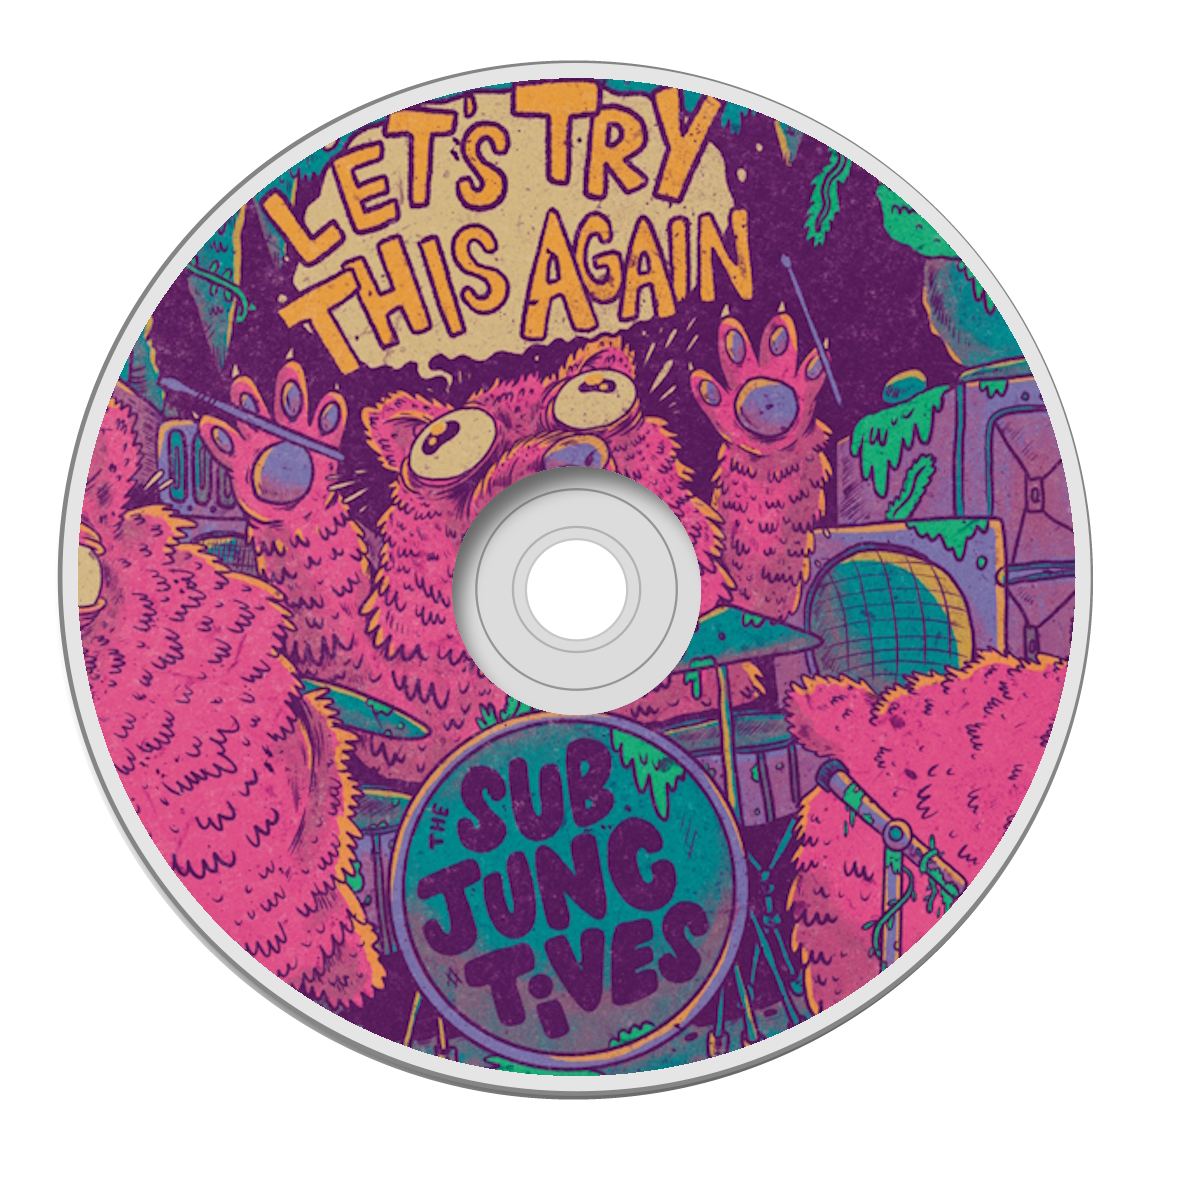 FREE, Signed Copy of Let's Try This Again CD